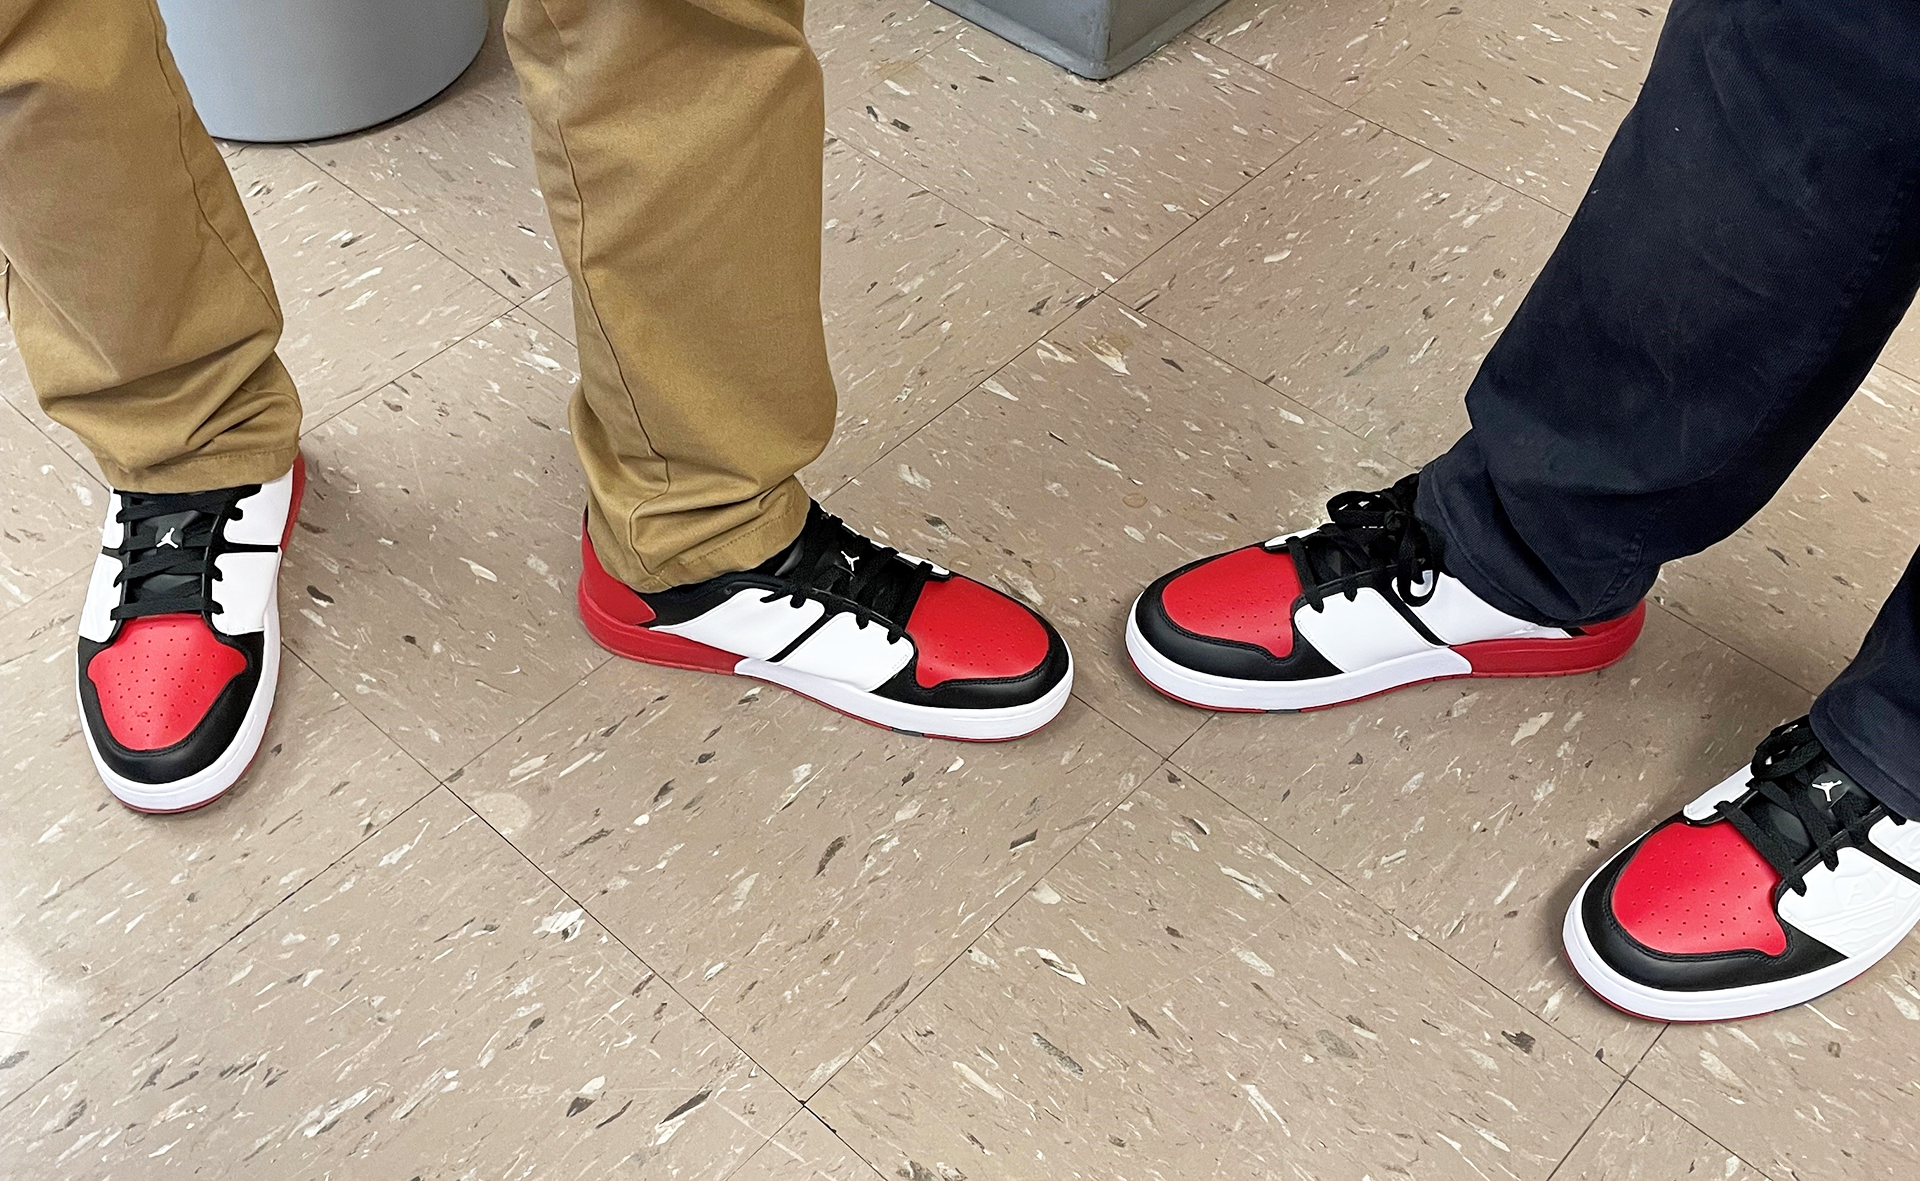 Mr. Glorfield and Mr. Dong show off matching pairs of shoes. | Submitted photo